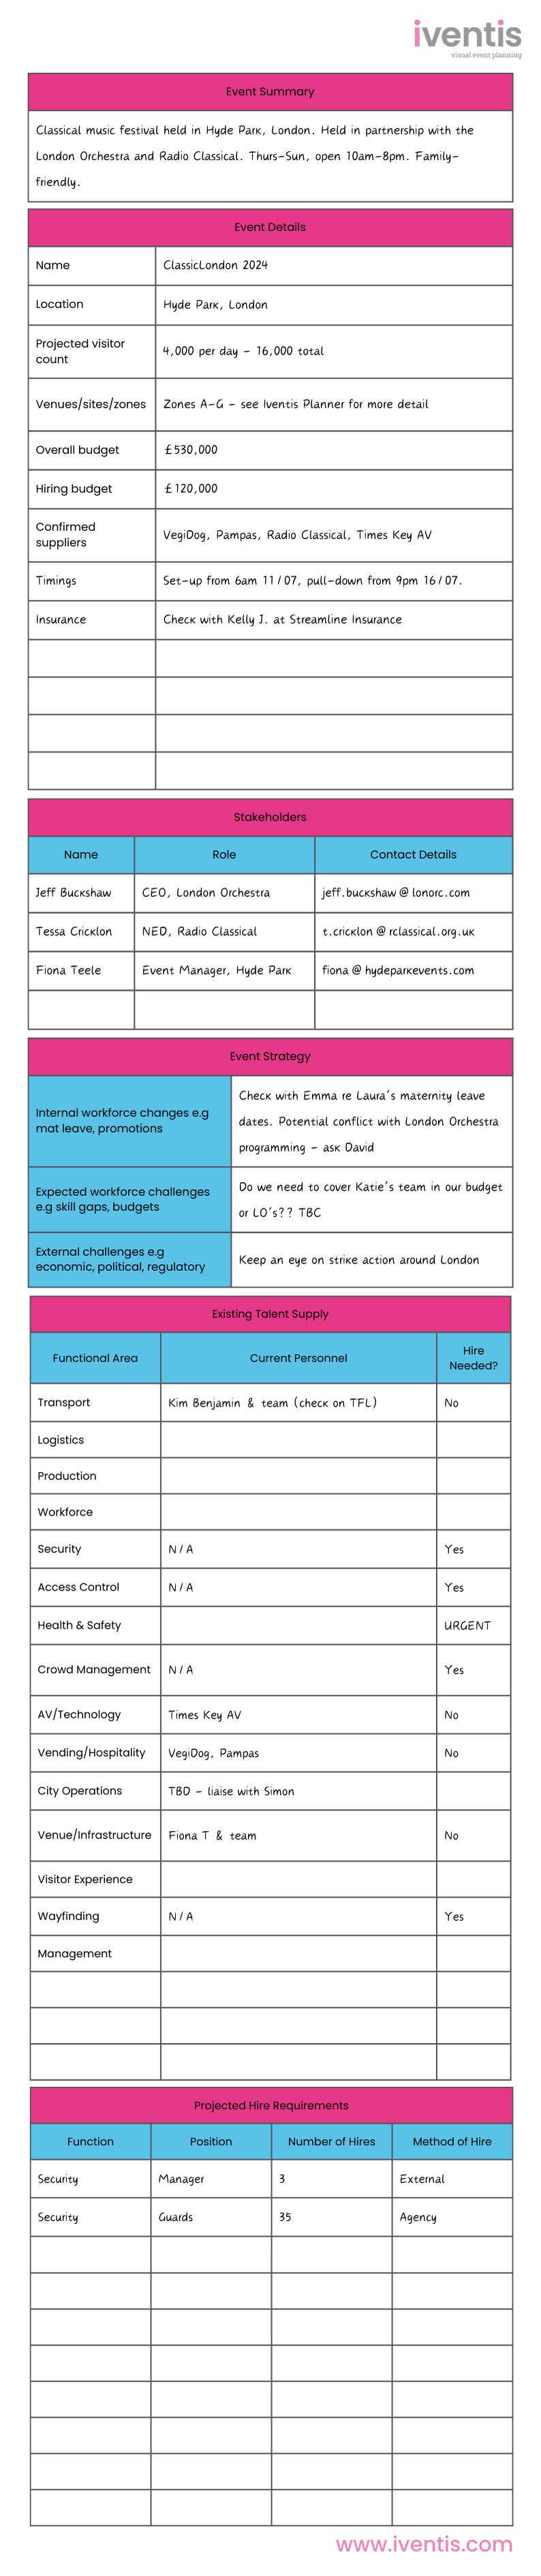 An example of how the Iventis strategic workforce planning template can be used